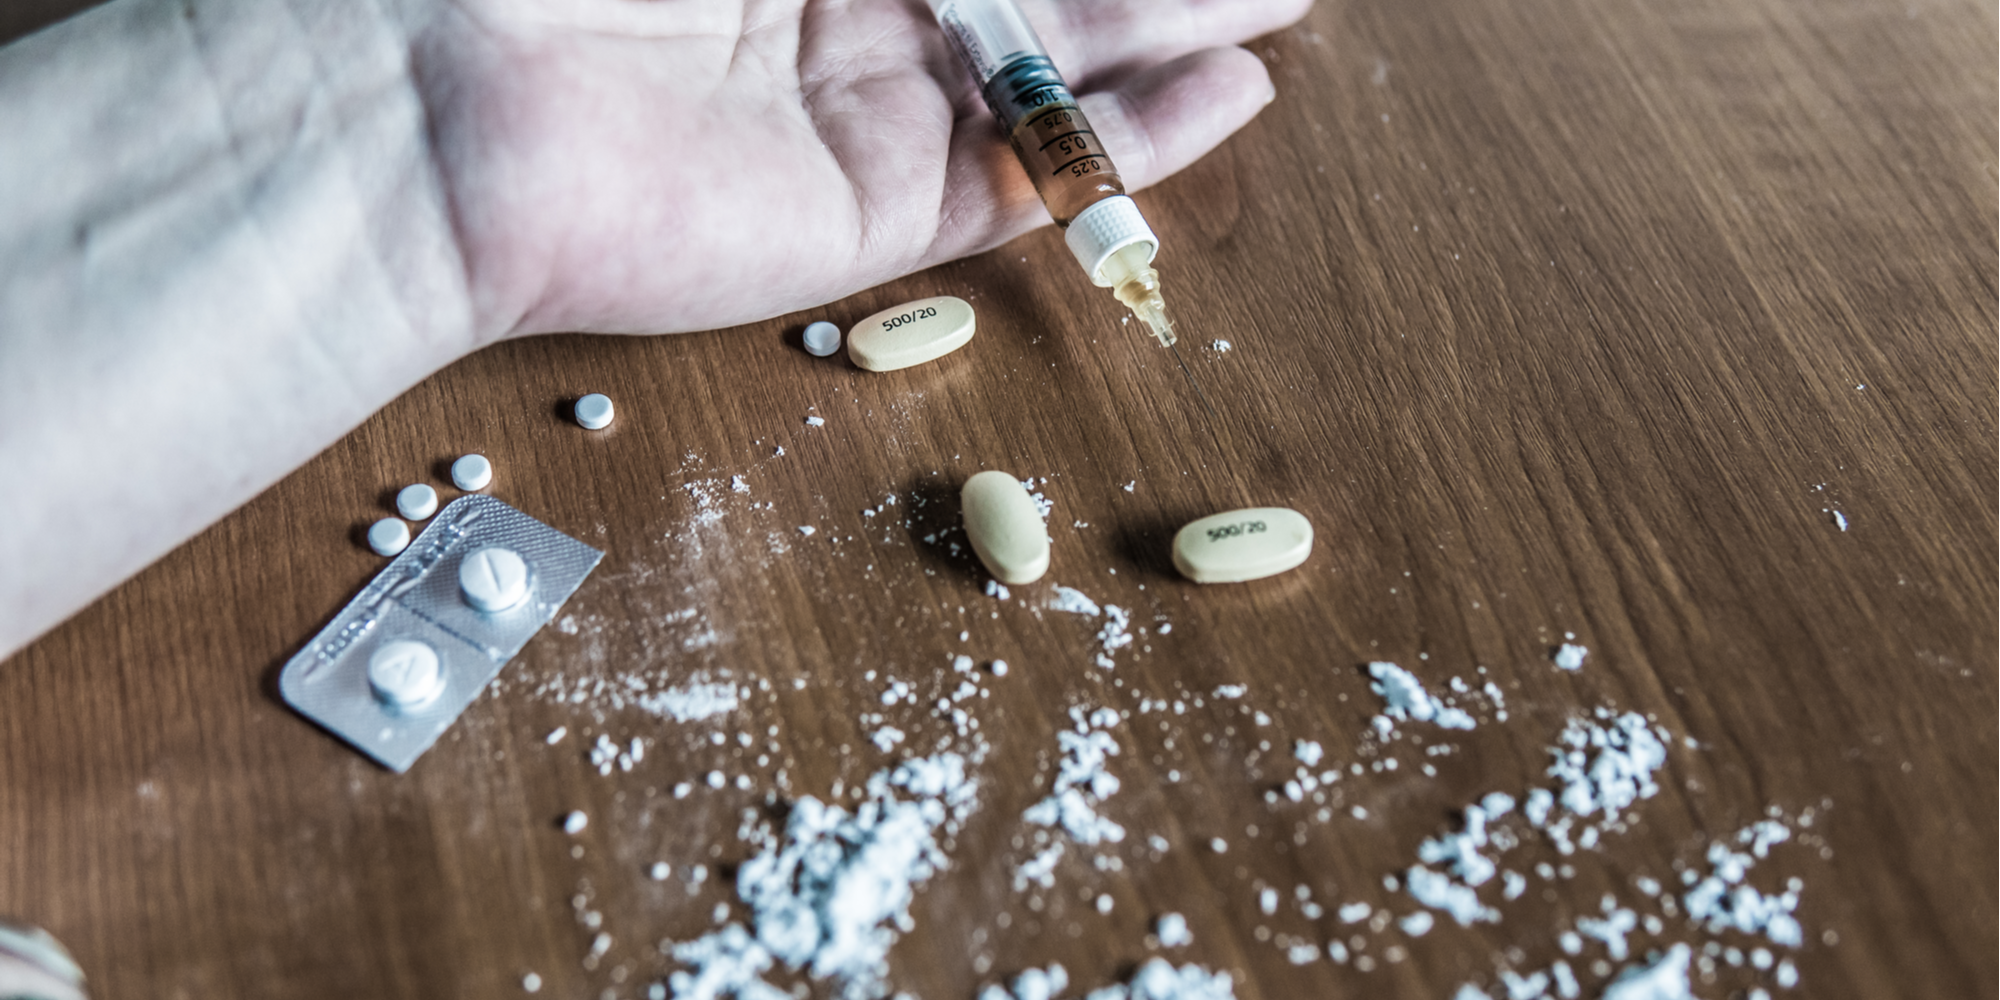 A person using a fentanyl